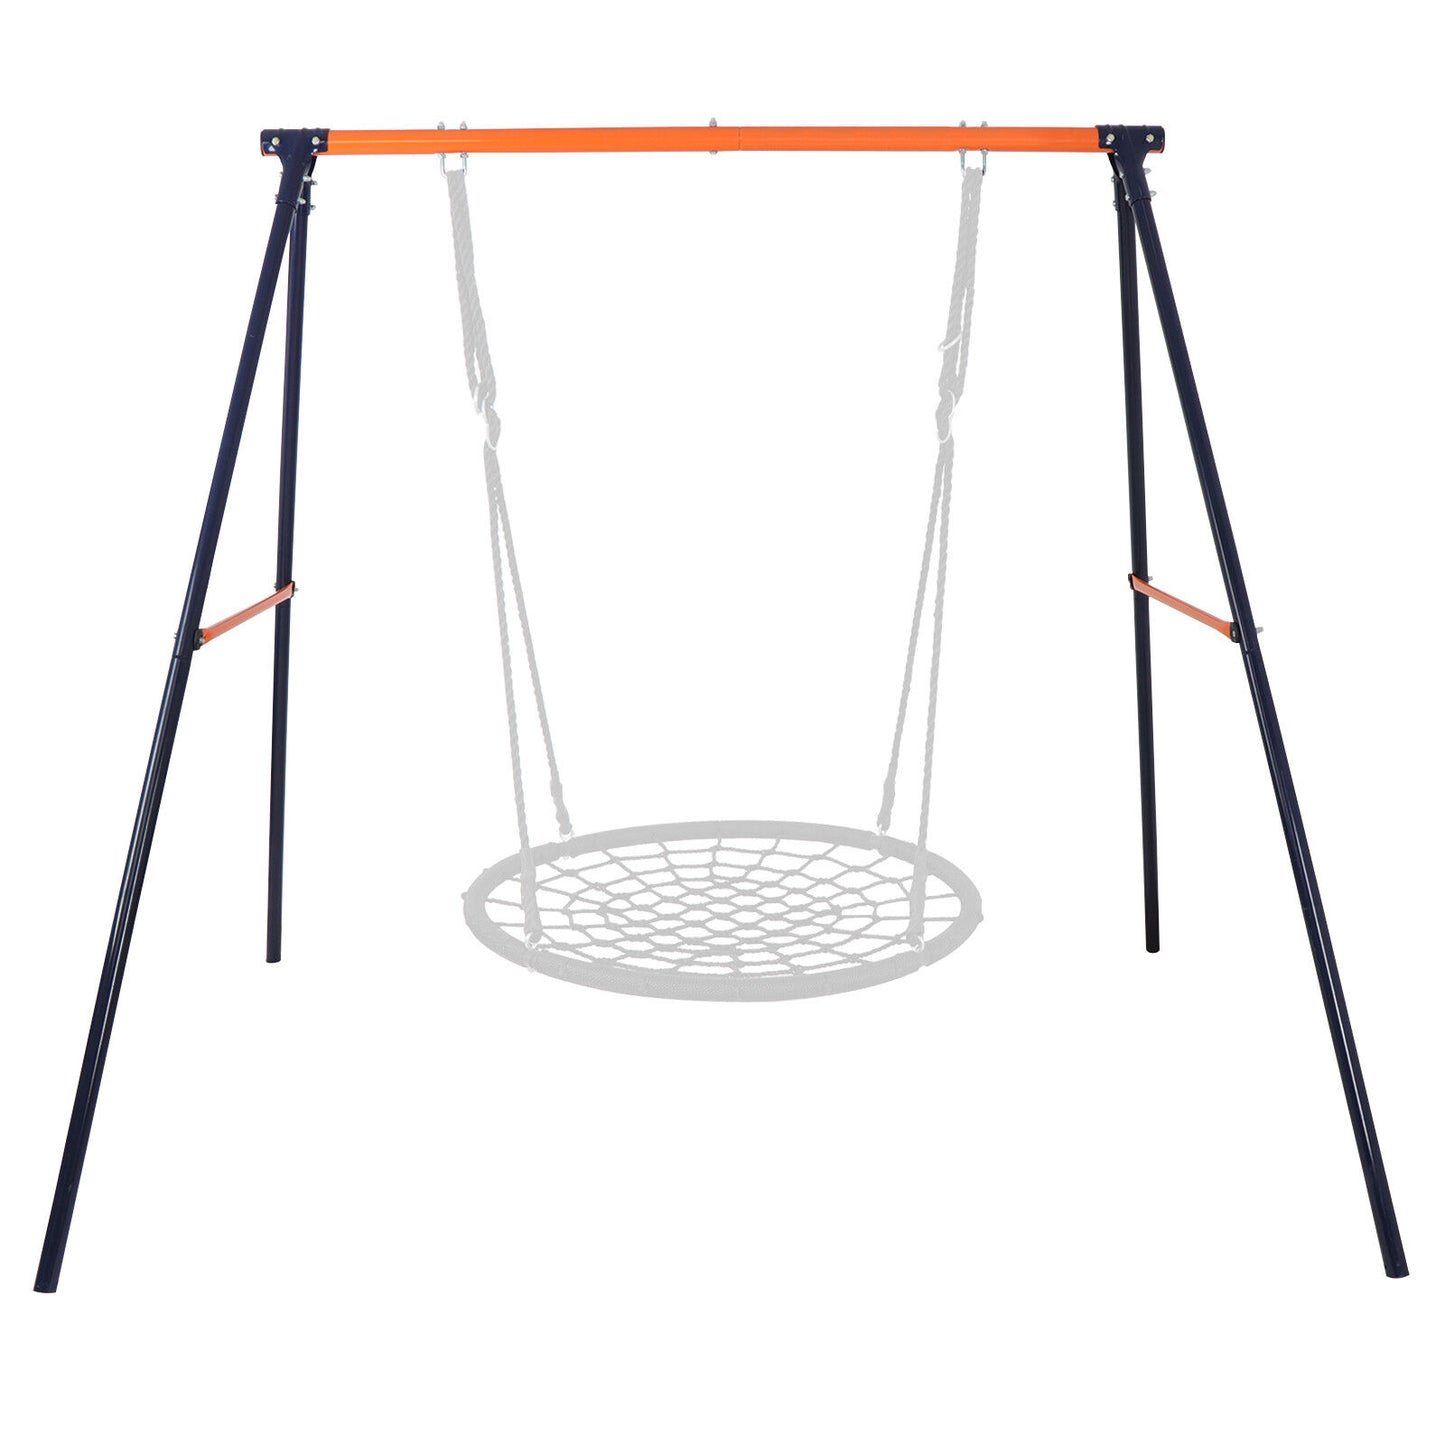 A-Frame Swing Stand Yard Lawn Playground + 48'' Spider Web Tree Swing Net